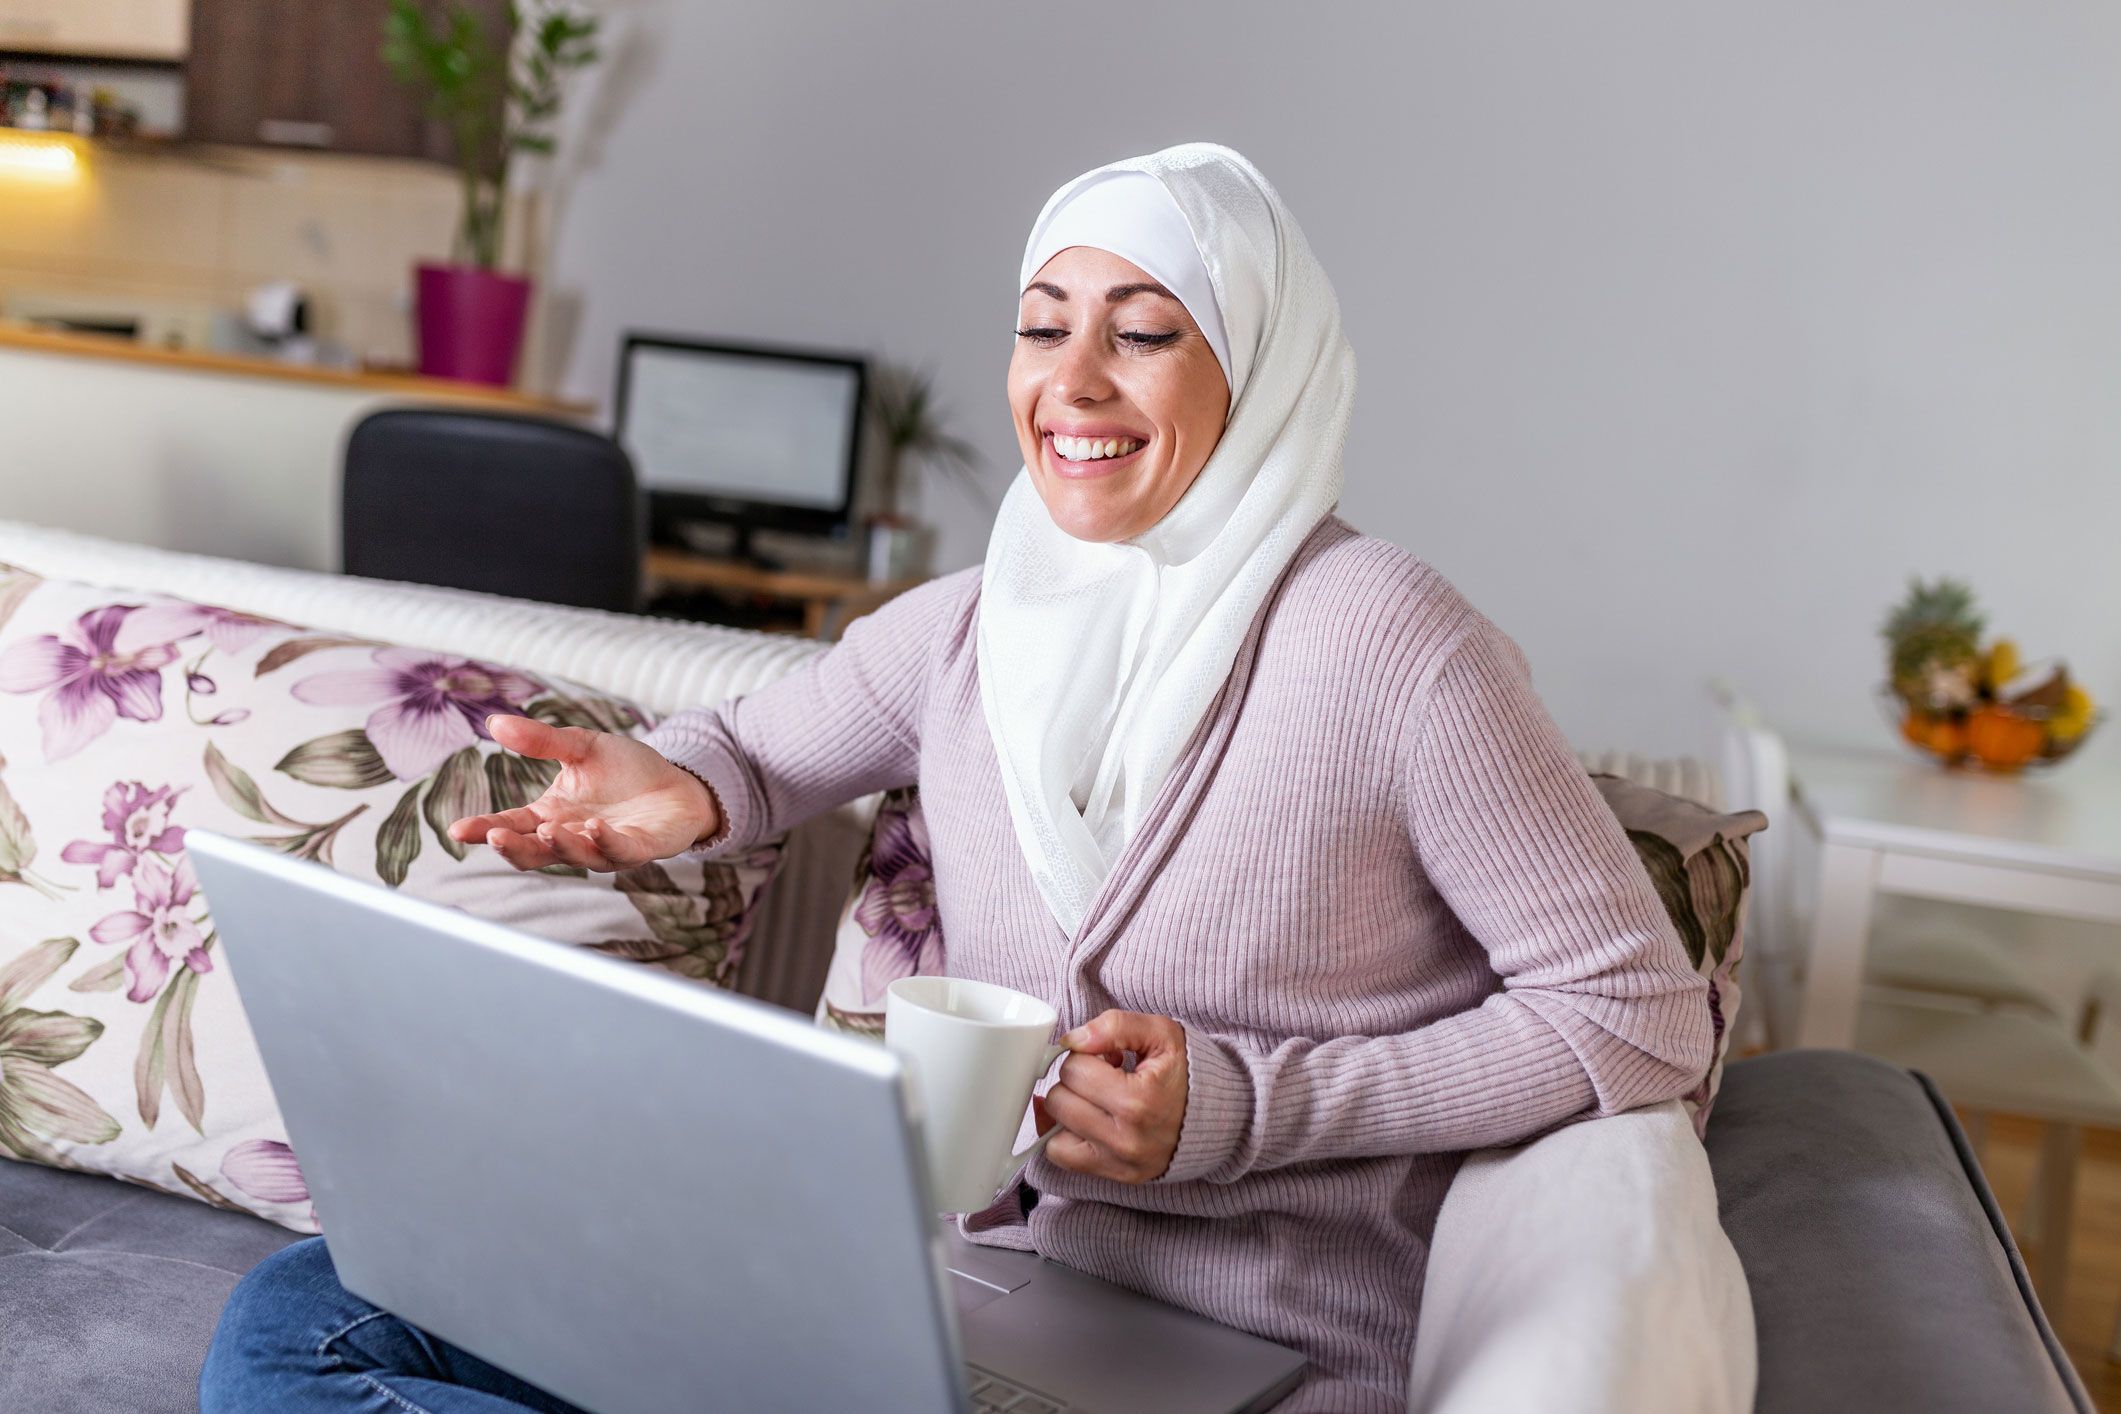 Smiling woman at her laptop